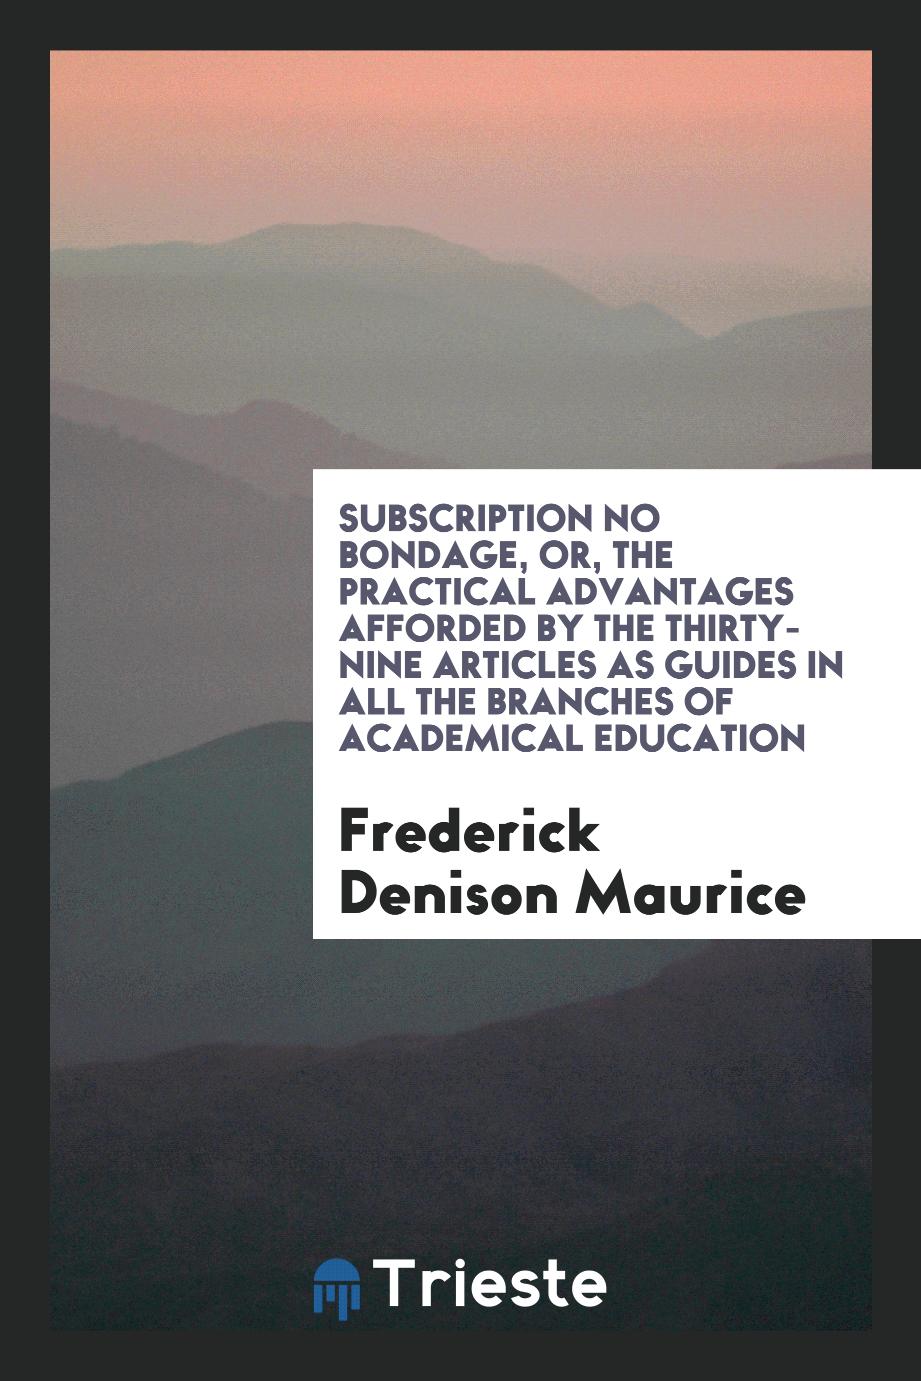 Subscription No Bondage, or, the Practical Advantages Afforded by the Thirty-Nine Articles as Guides in All the Branches of Academical Education